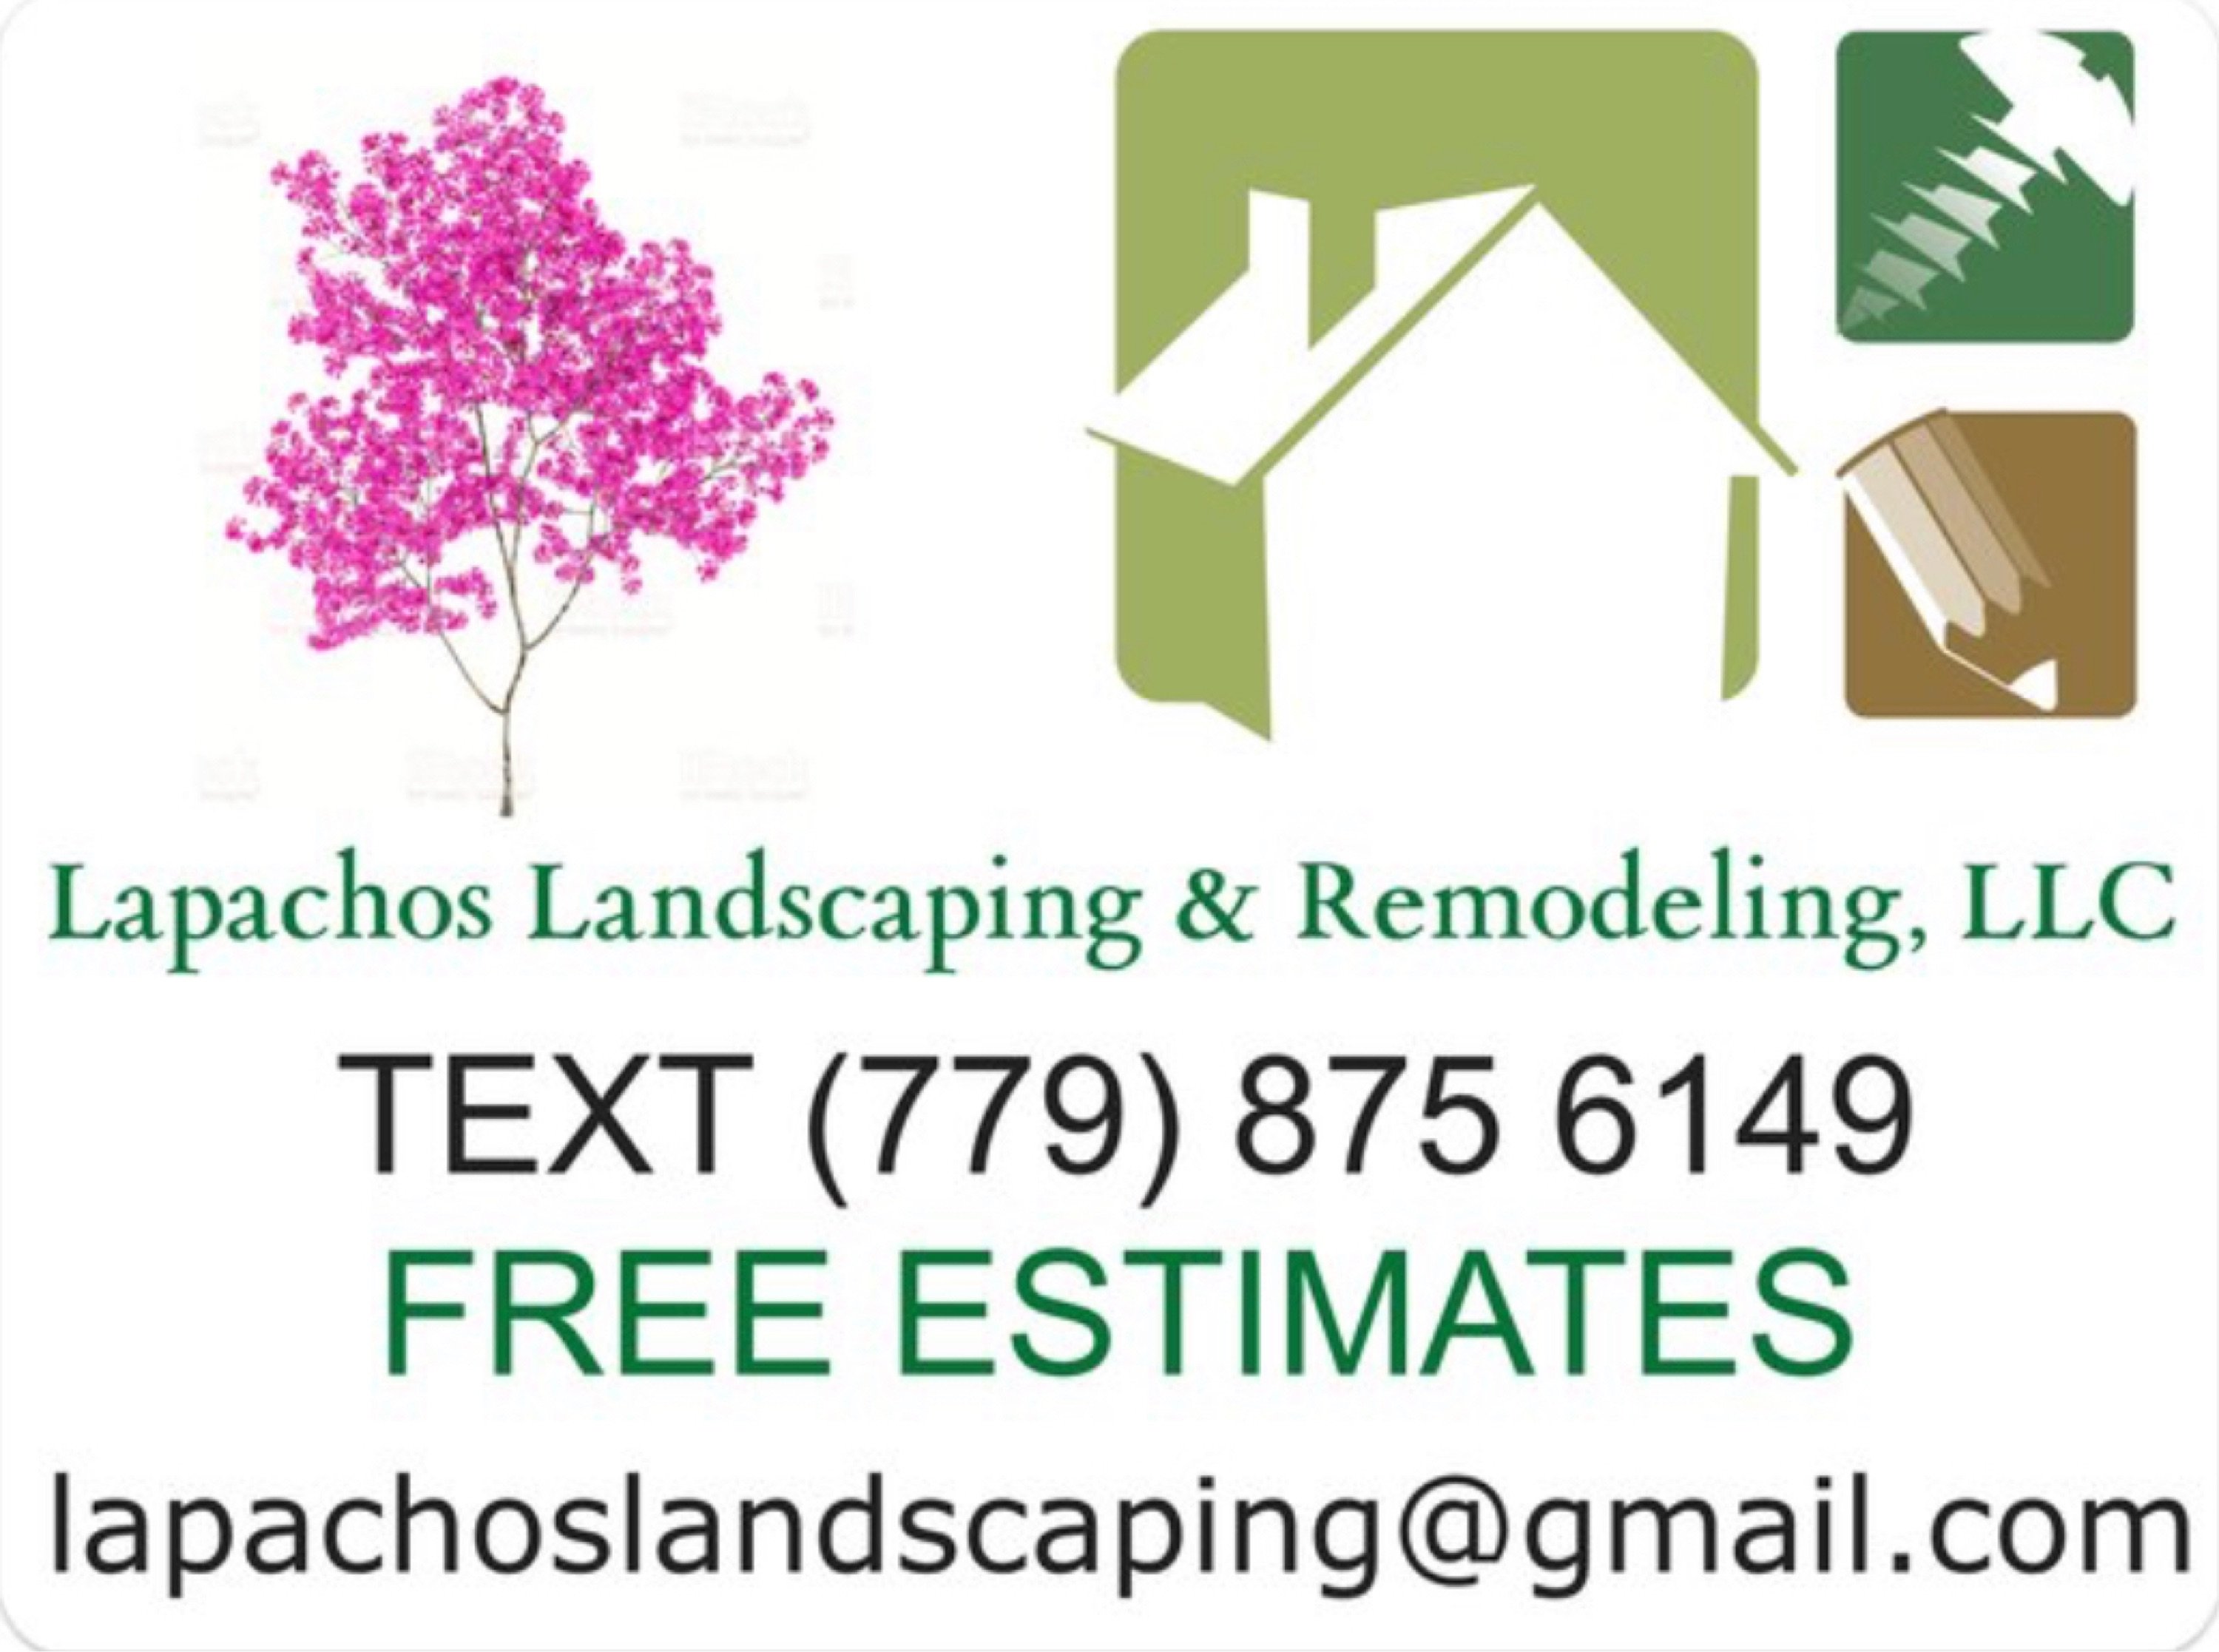 Lapachos Landscaping and Remodeling, LLC Logo